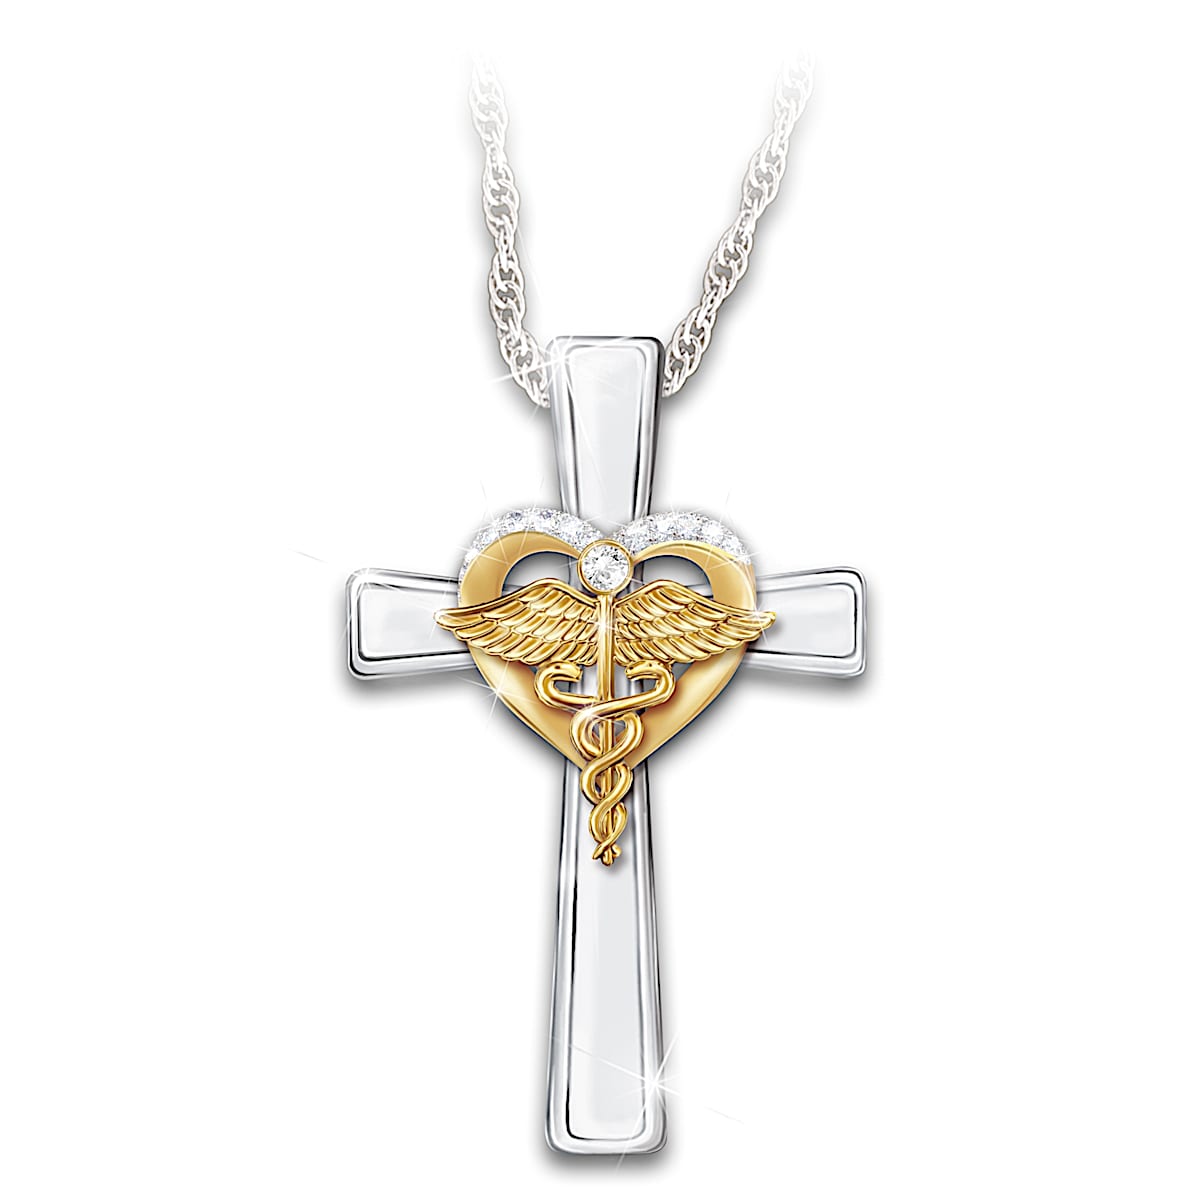 Faithful Caring Sterling Silver Cross Pendant Necklace Featuring The ...